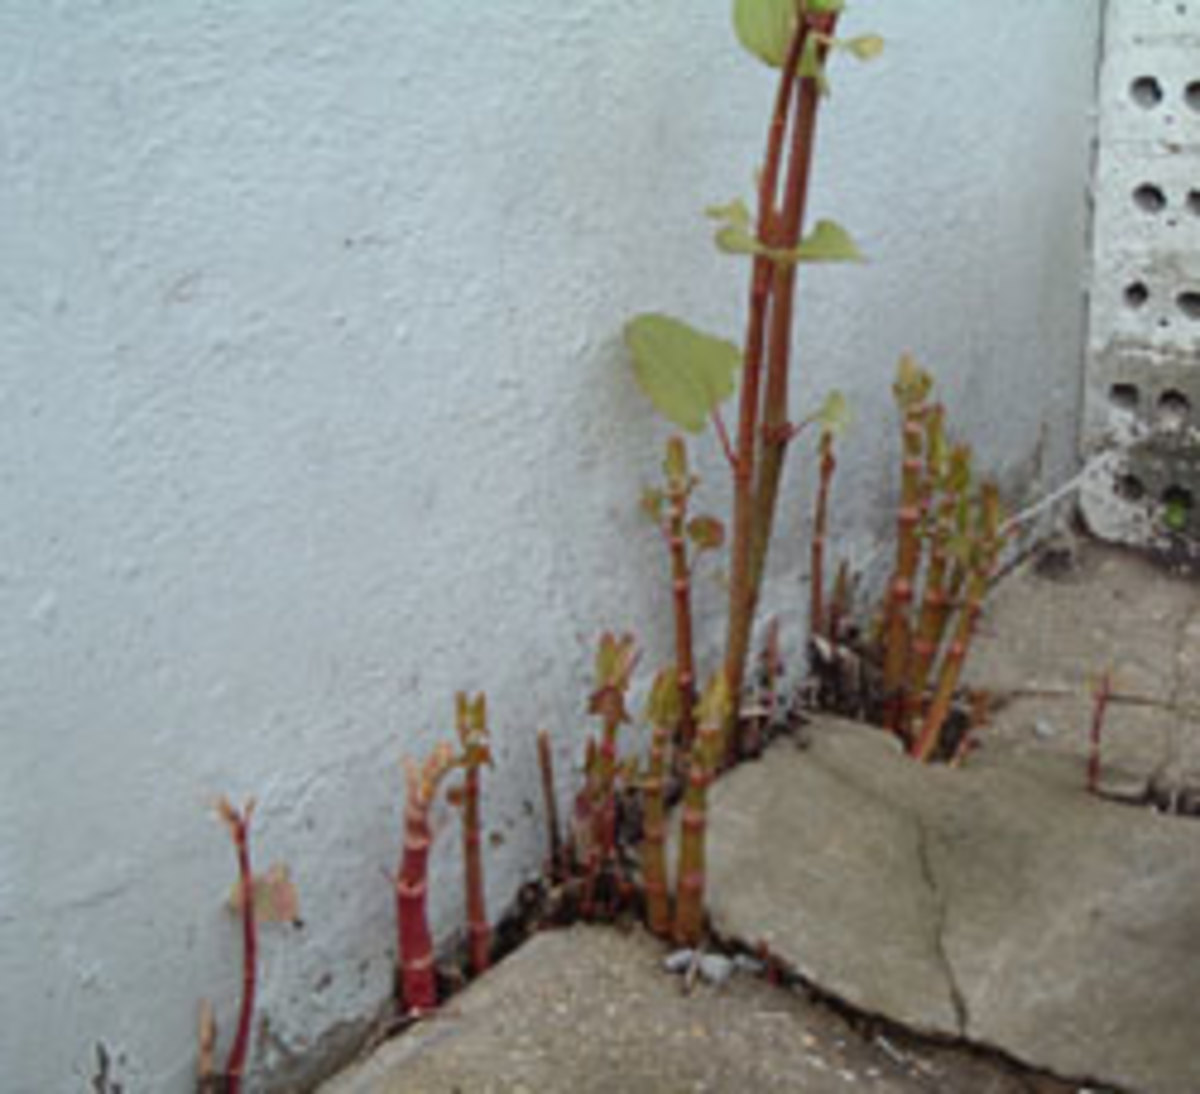 knotweed-removal-images-information-dangers-solutions-killing-knotweed